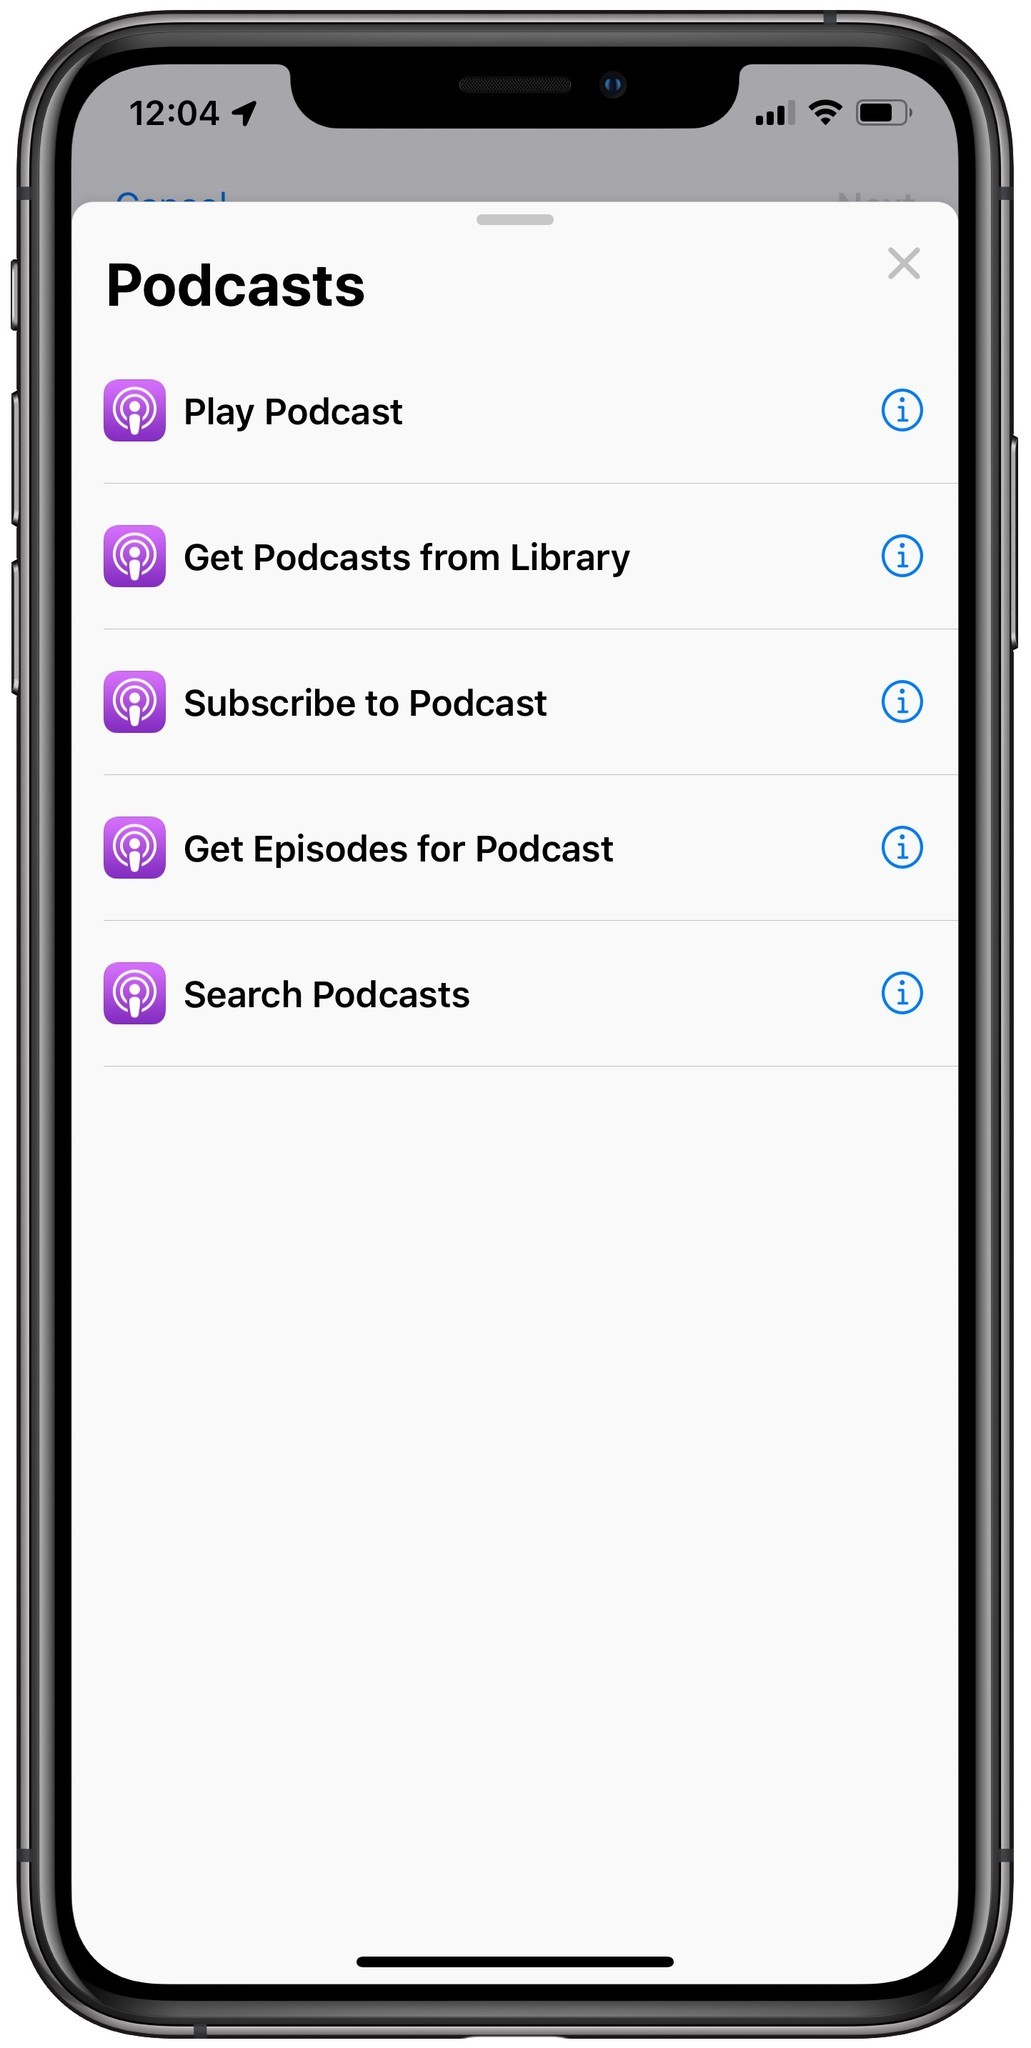 Screenshot showing new Podcast actions available for Shortcuts in iOS 13, including Play Podcast, Get Podcasts from Library, Subscribe to Podcast, Get Episodes for Podcast, and Search Podcasts.